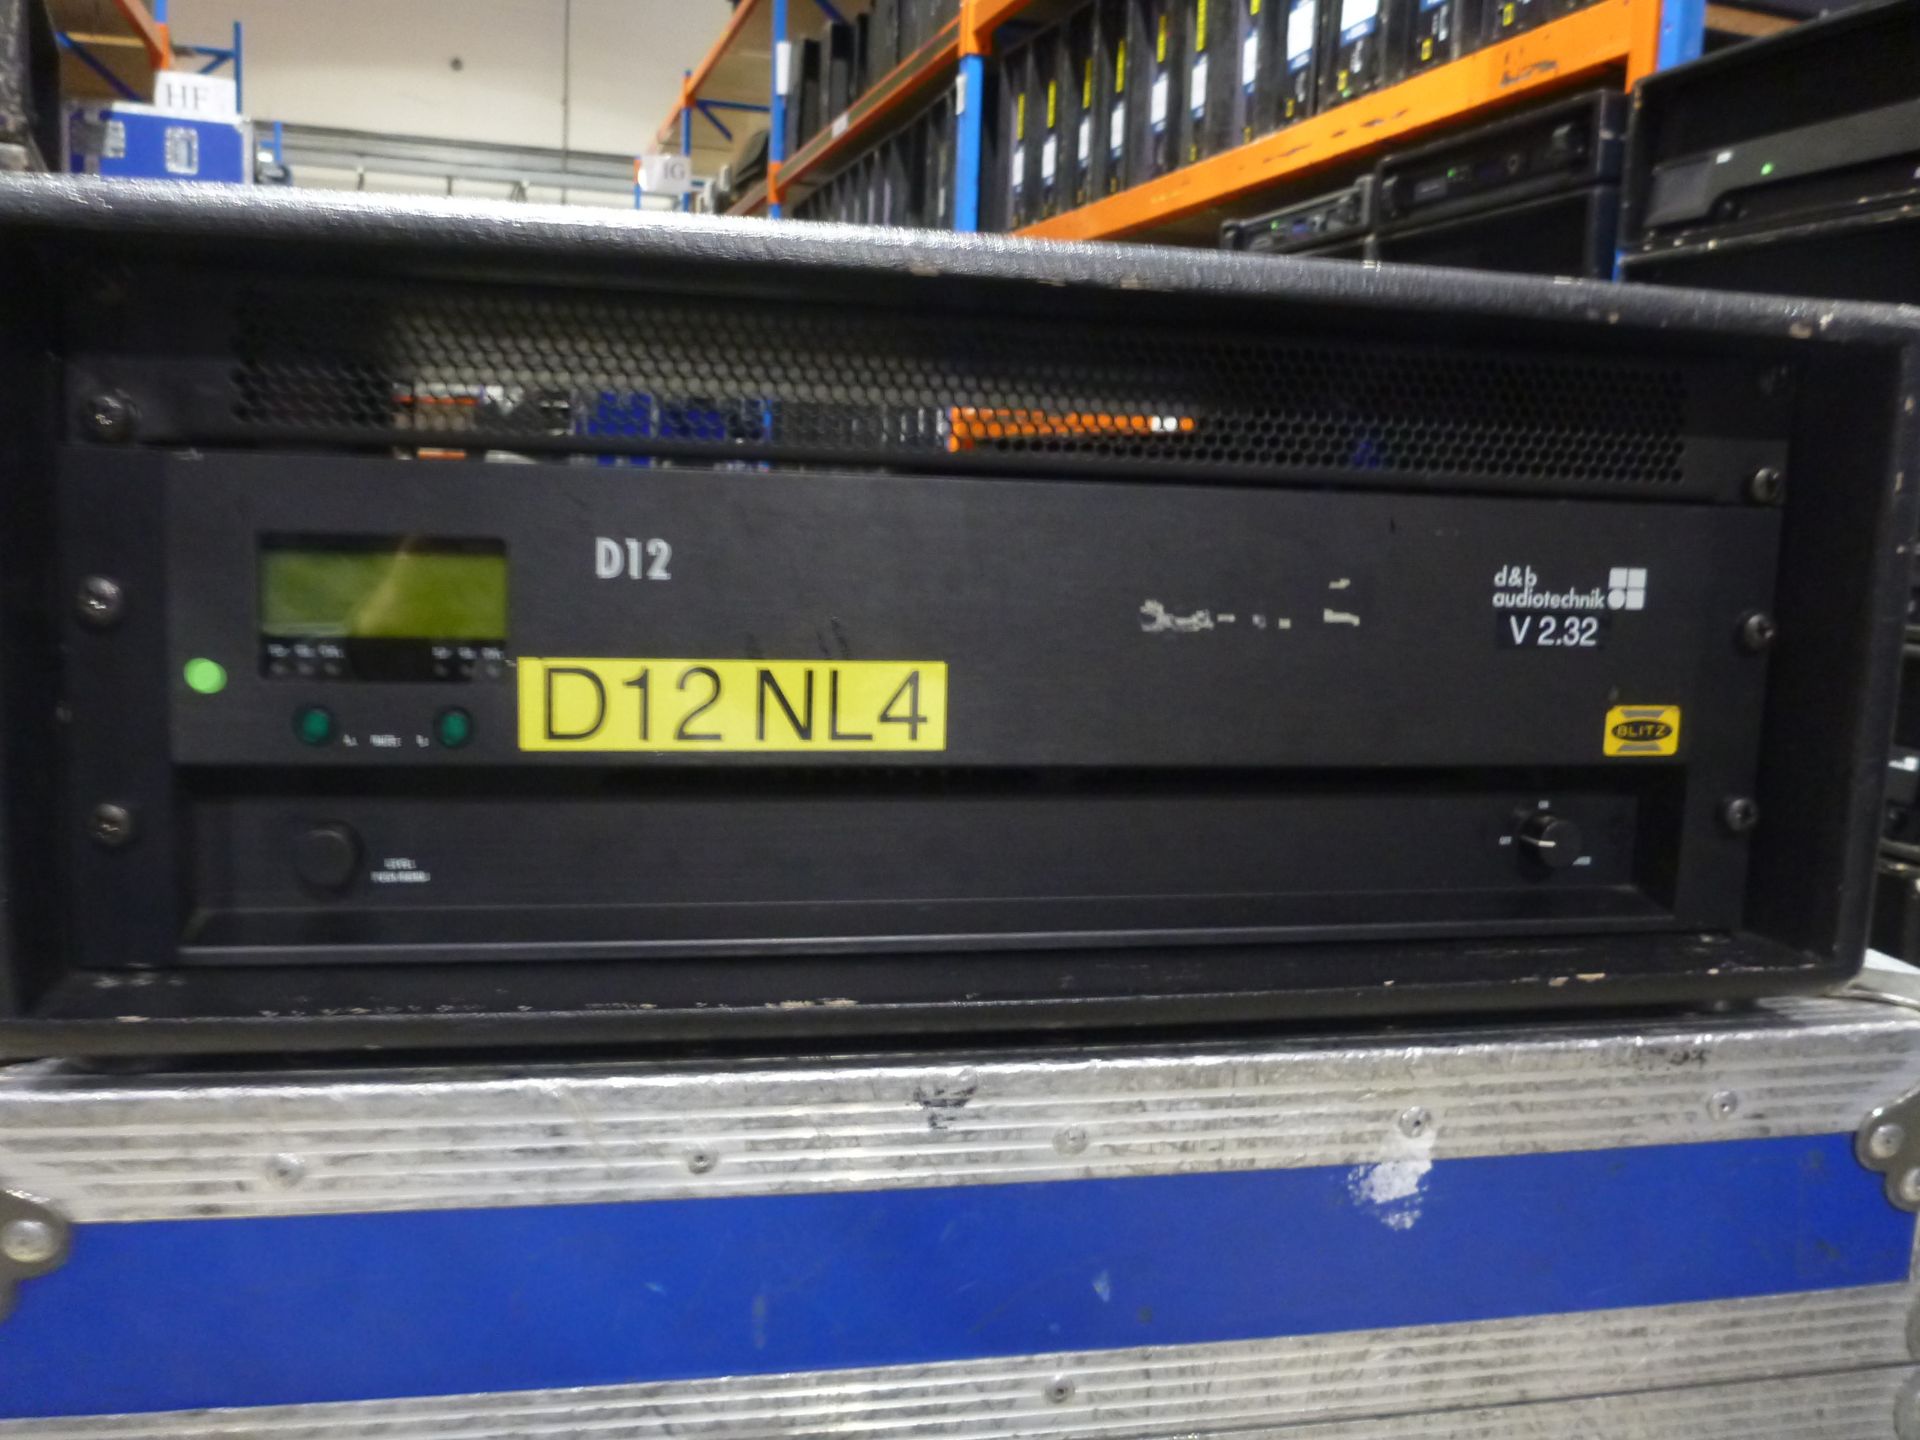 D & B Audiotecknik D12 NL4 2 Chnl Power Amplifier. Mounted in rack mount box, 13A to powercon cable.